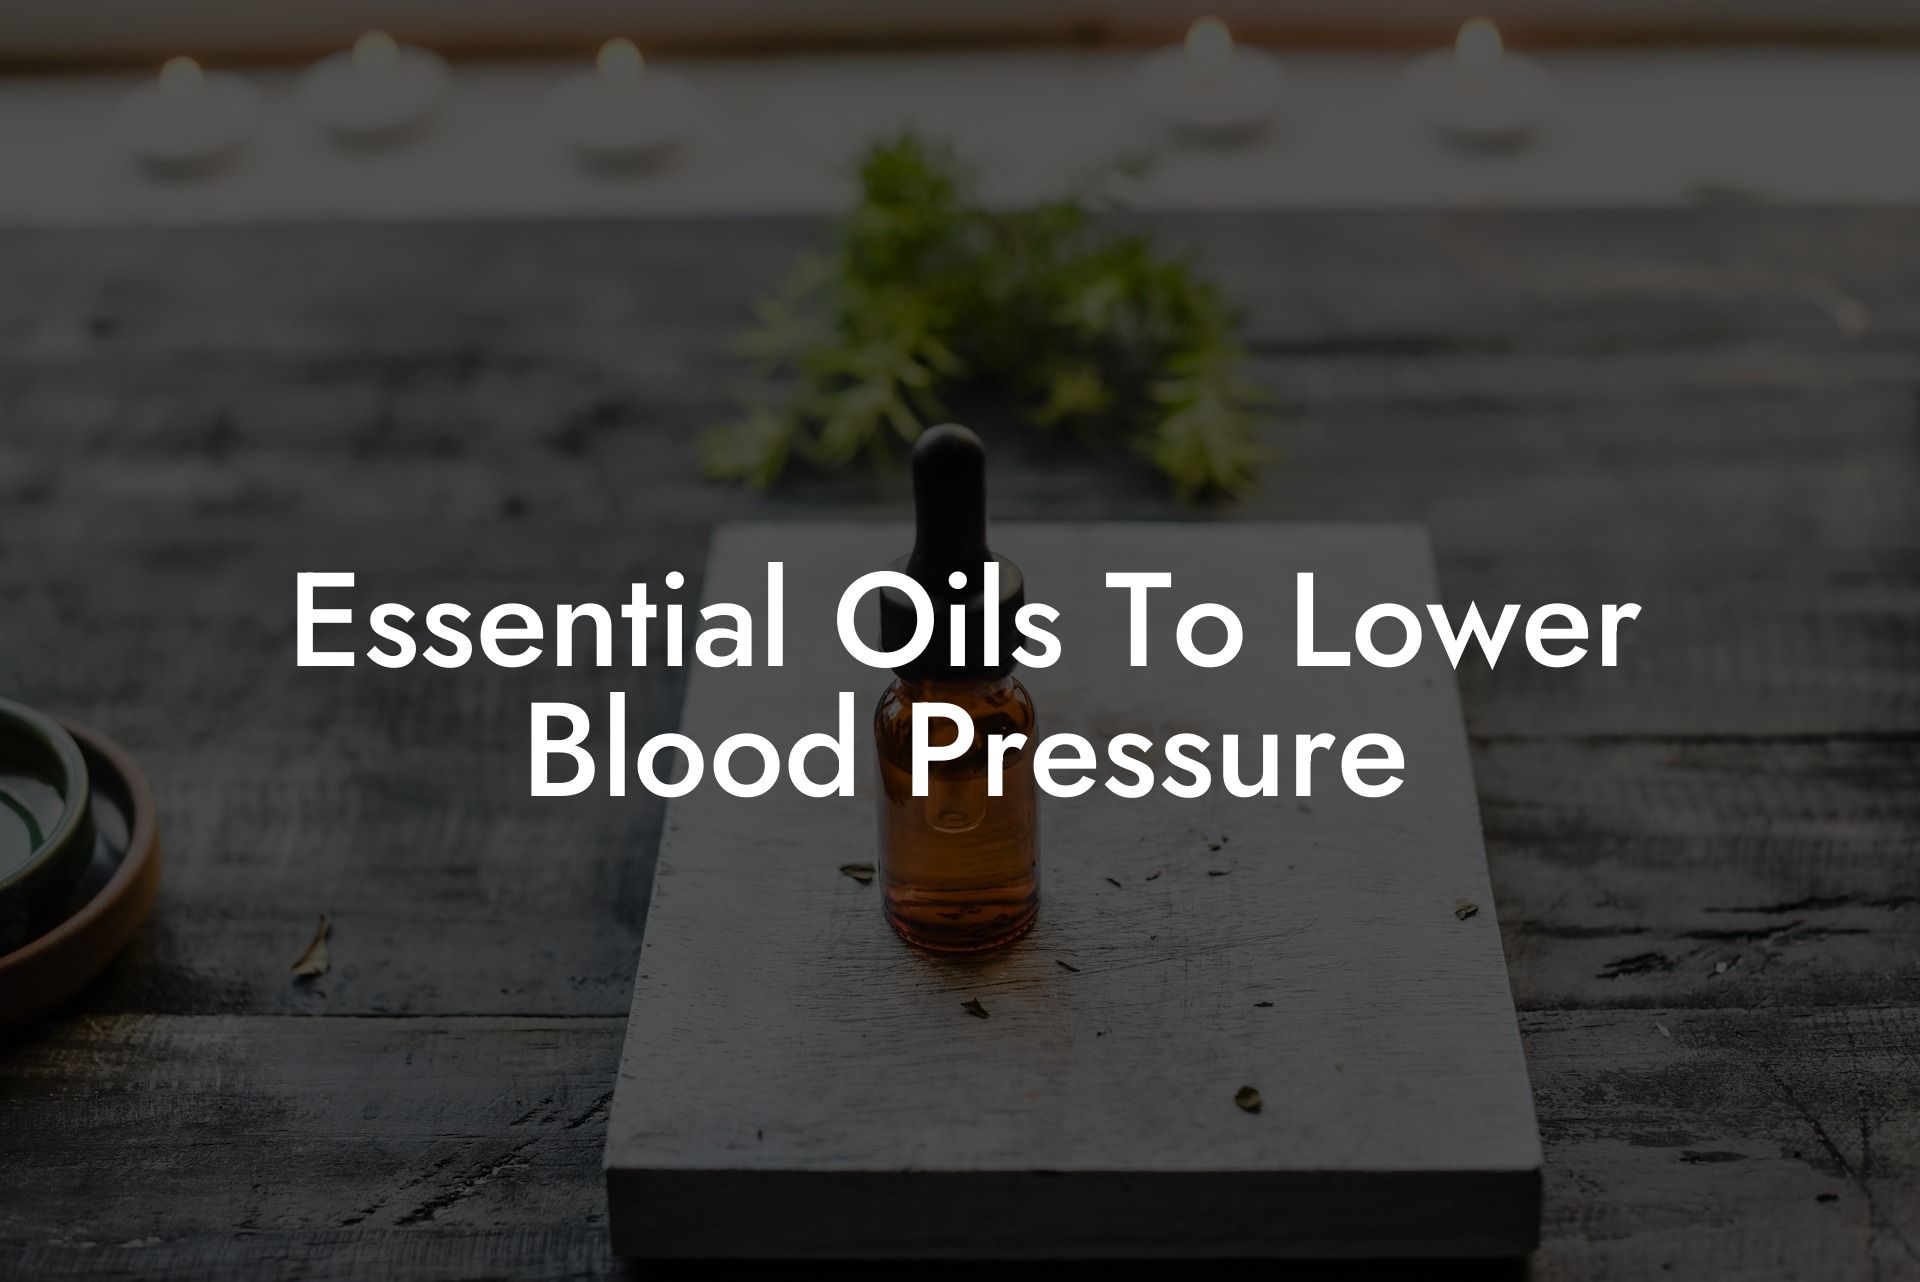 Essential Oils To Lower Blood Pressure